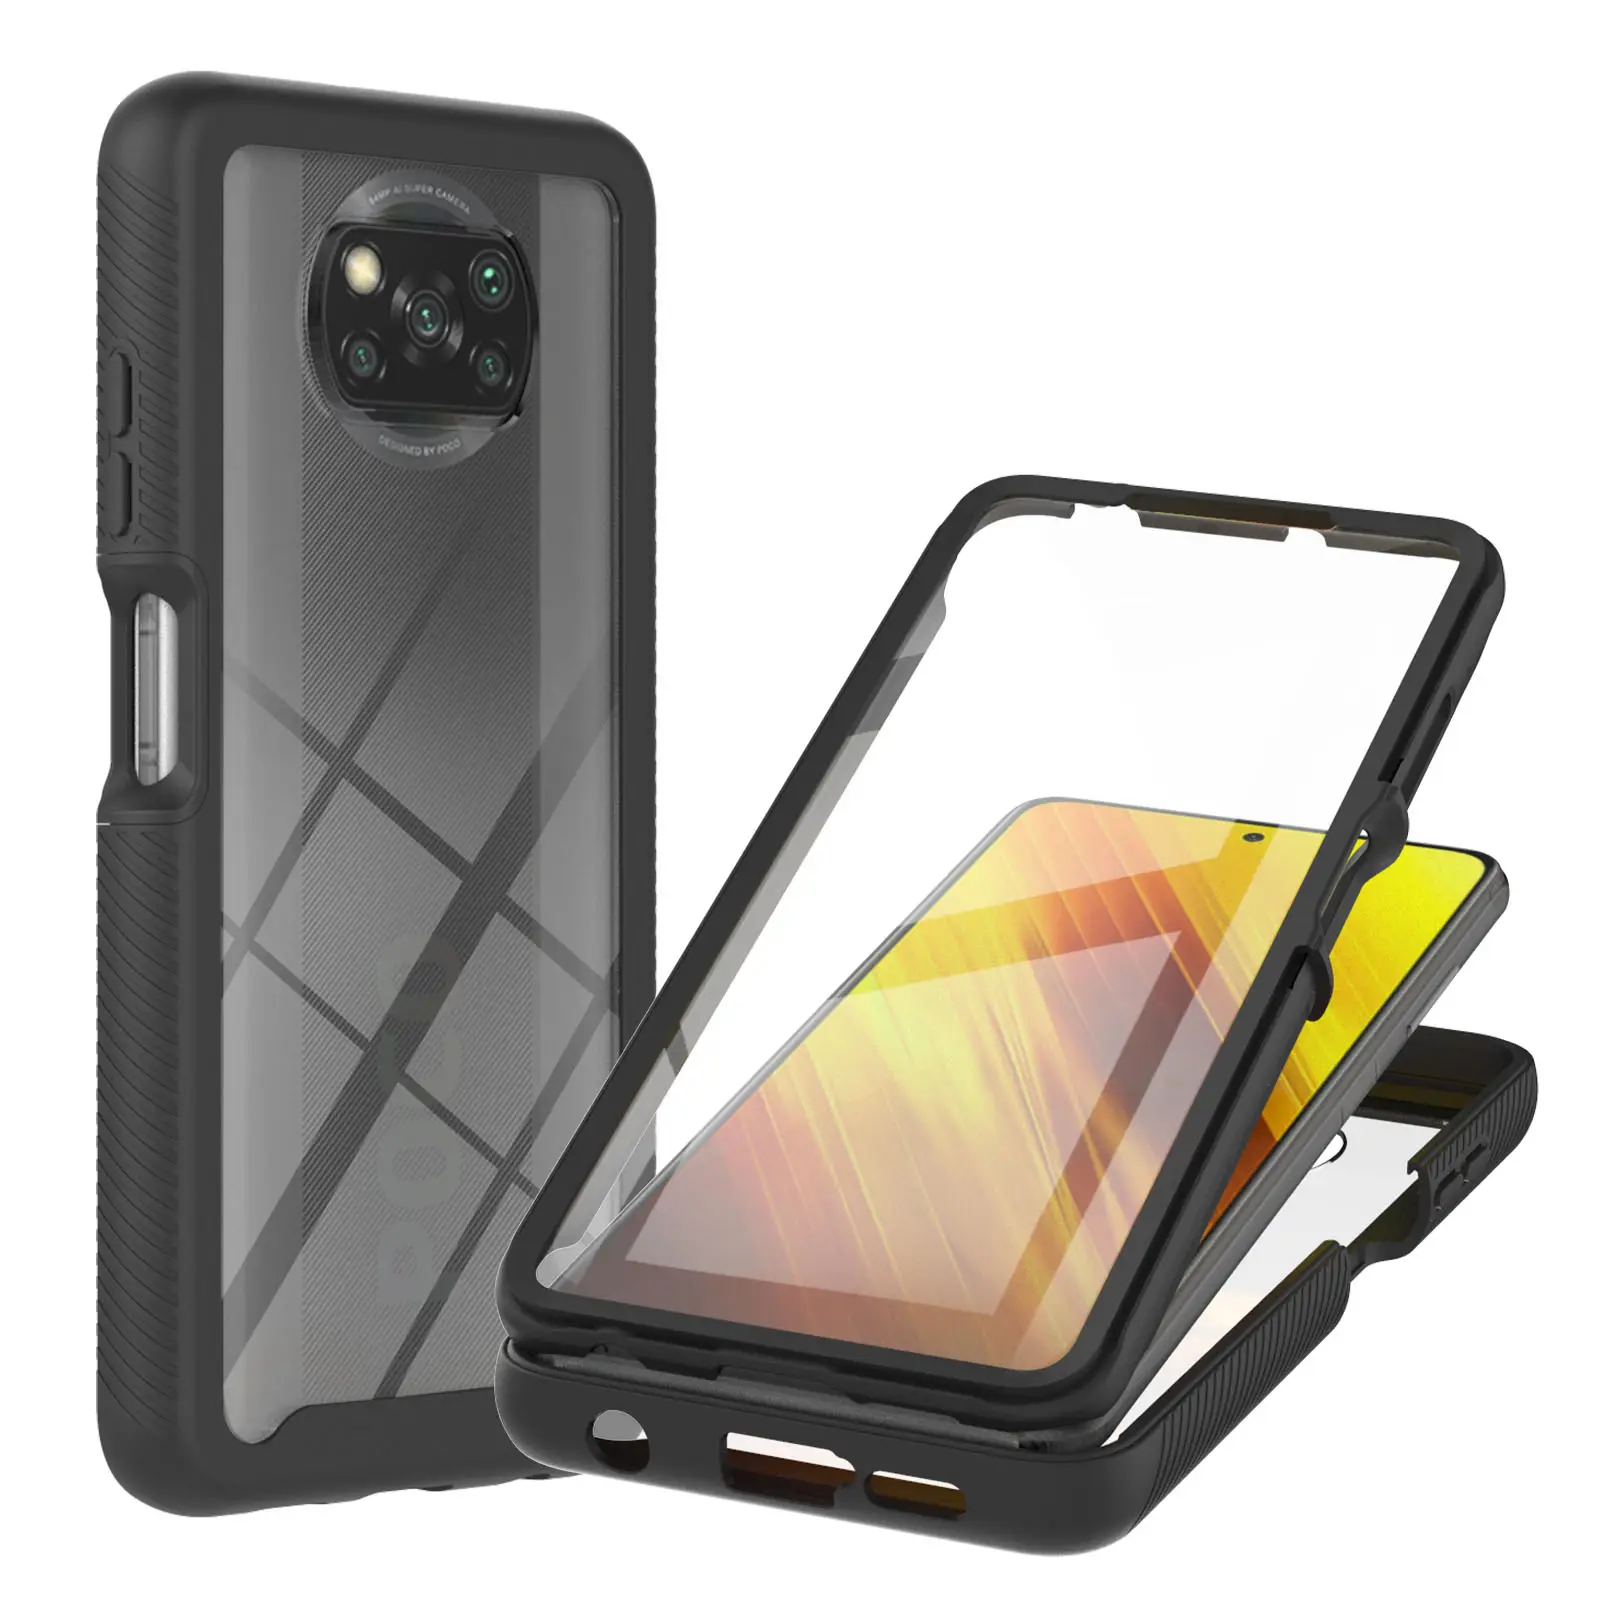 For Poco X3 NFC POCO X3 mobile cover High Quality 360 Full Body Slim Armor Case Rugged Clear Back Shell Protector Cover